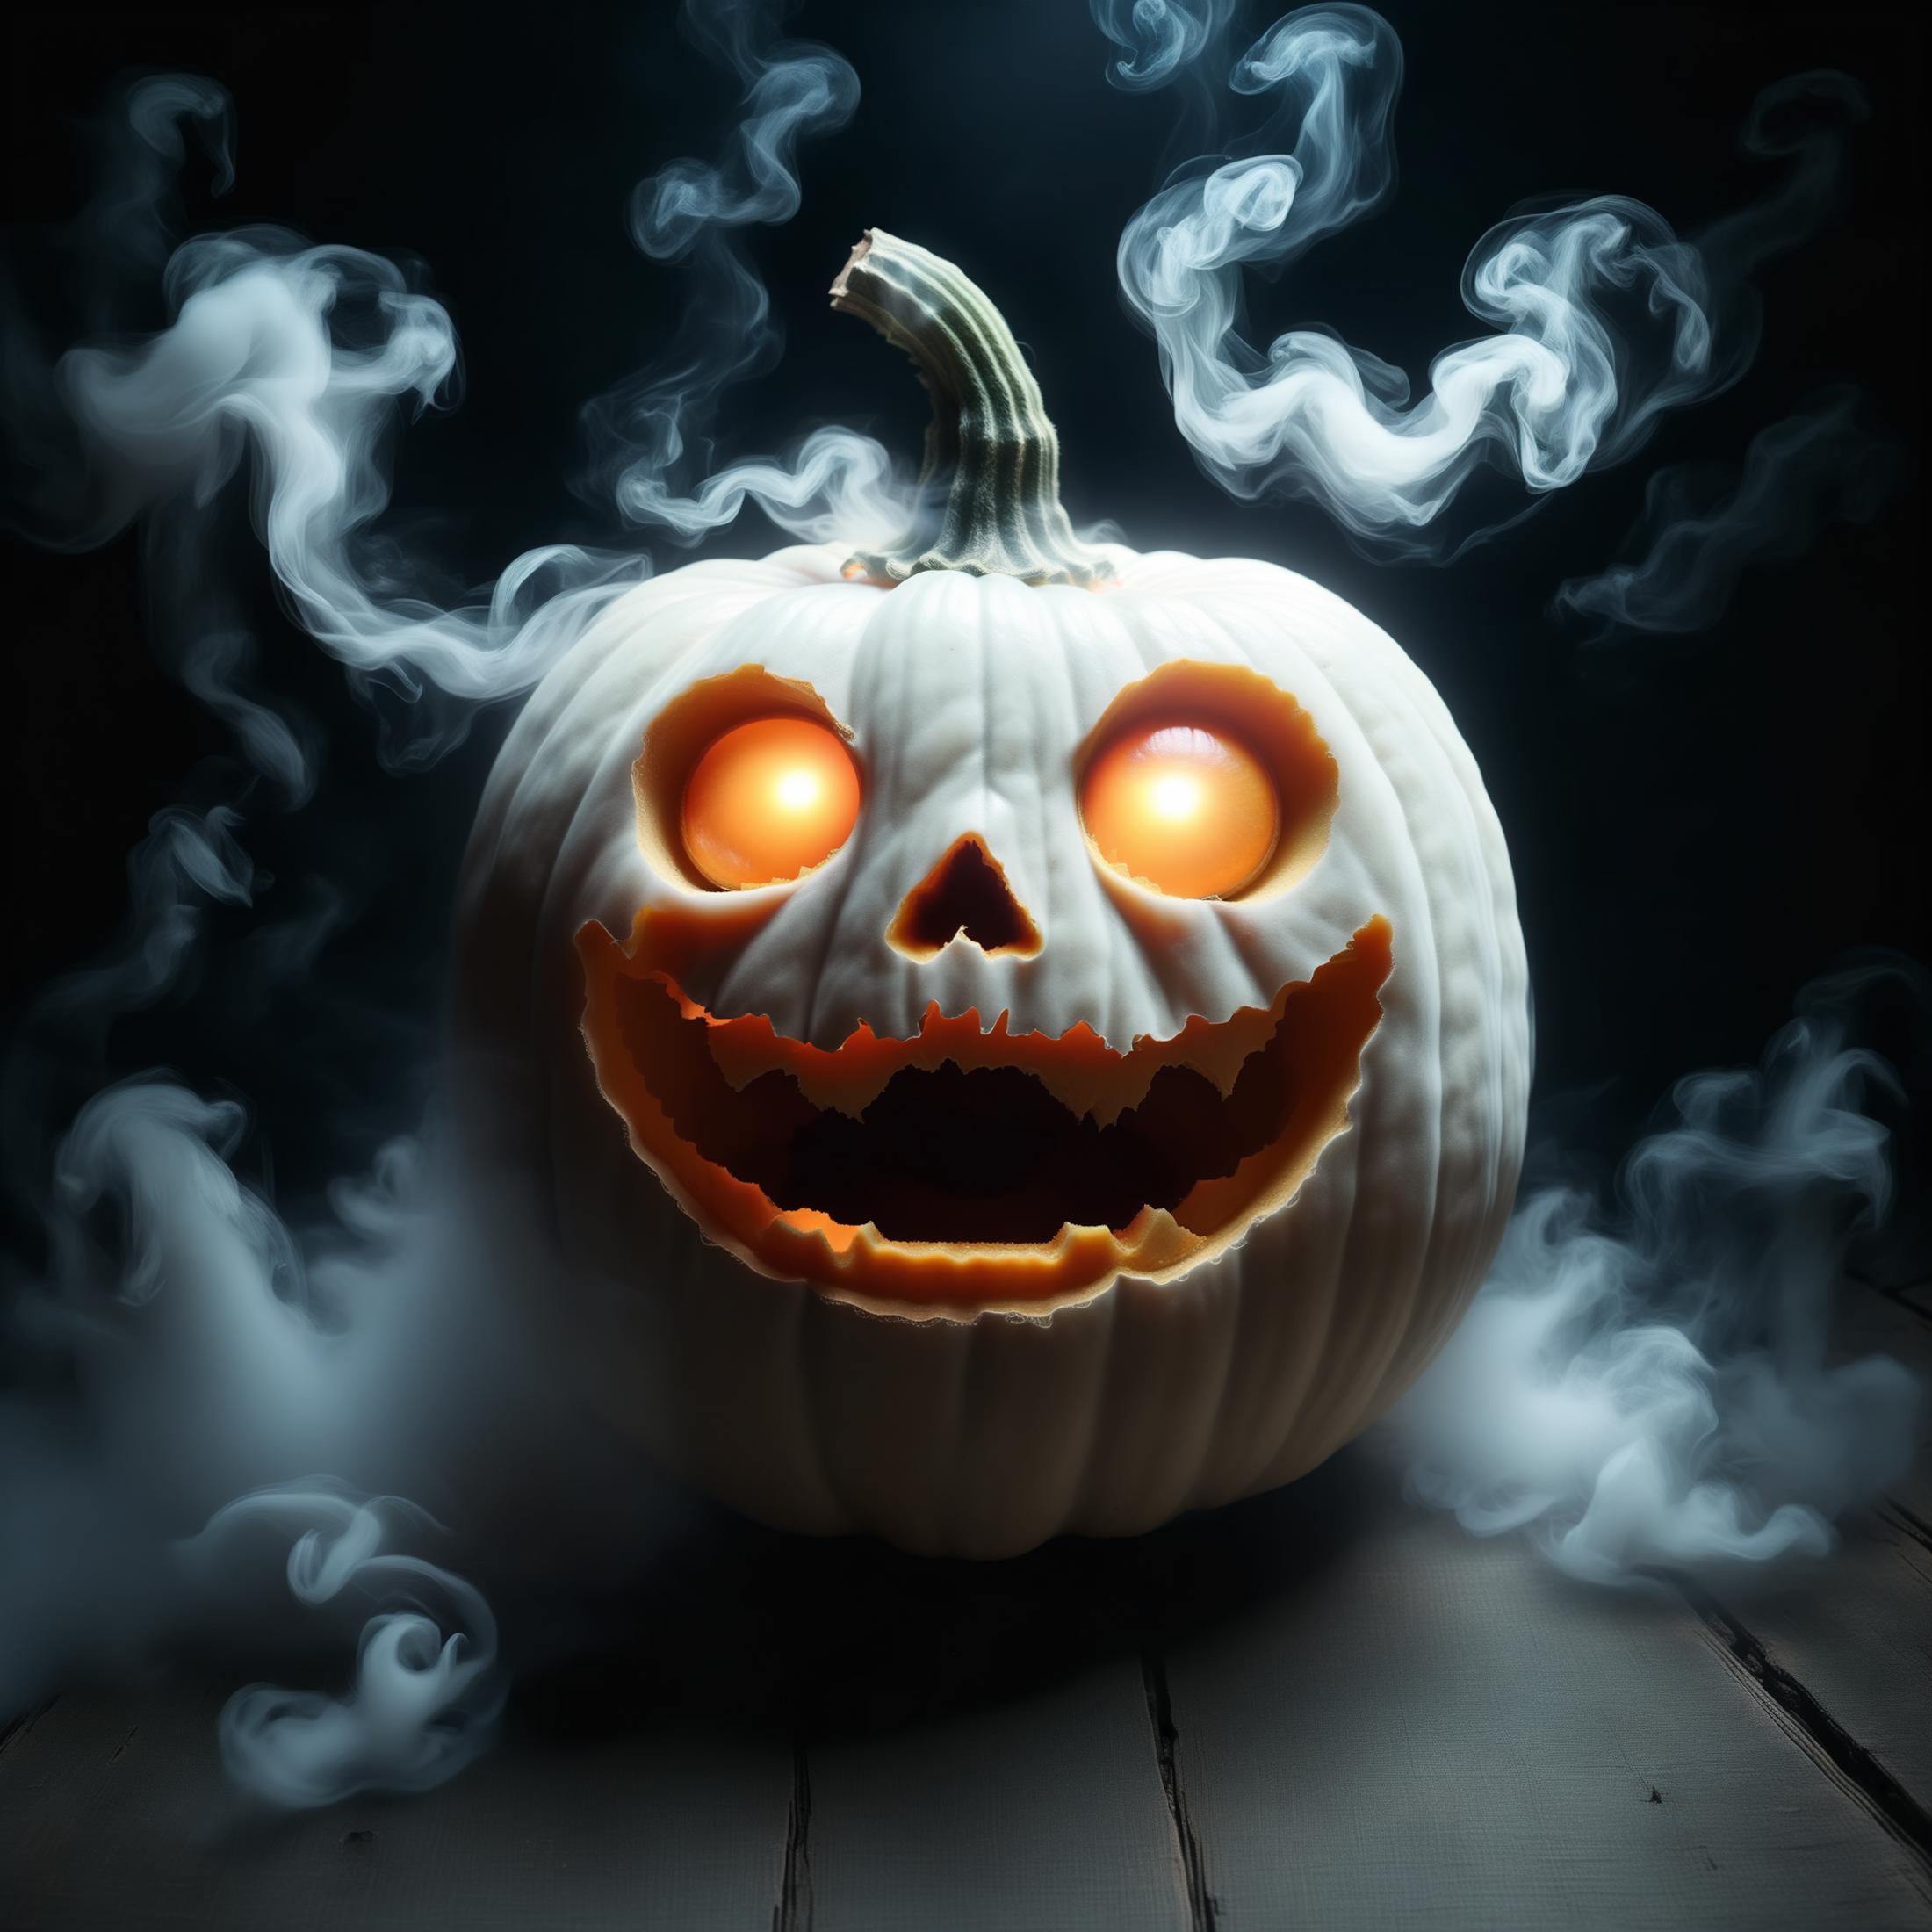 A Scary Pumpkin Display with Smoke Effects